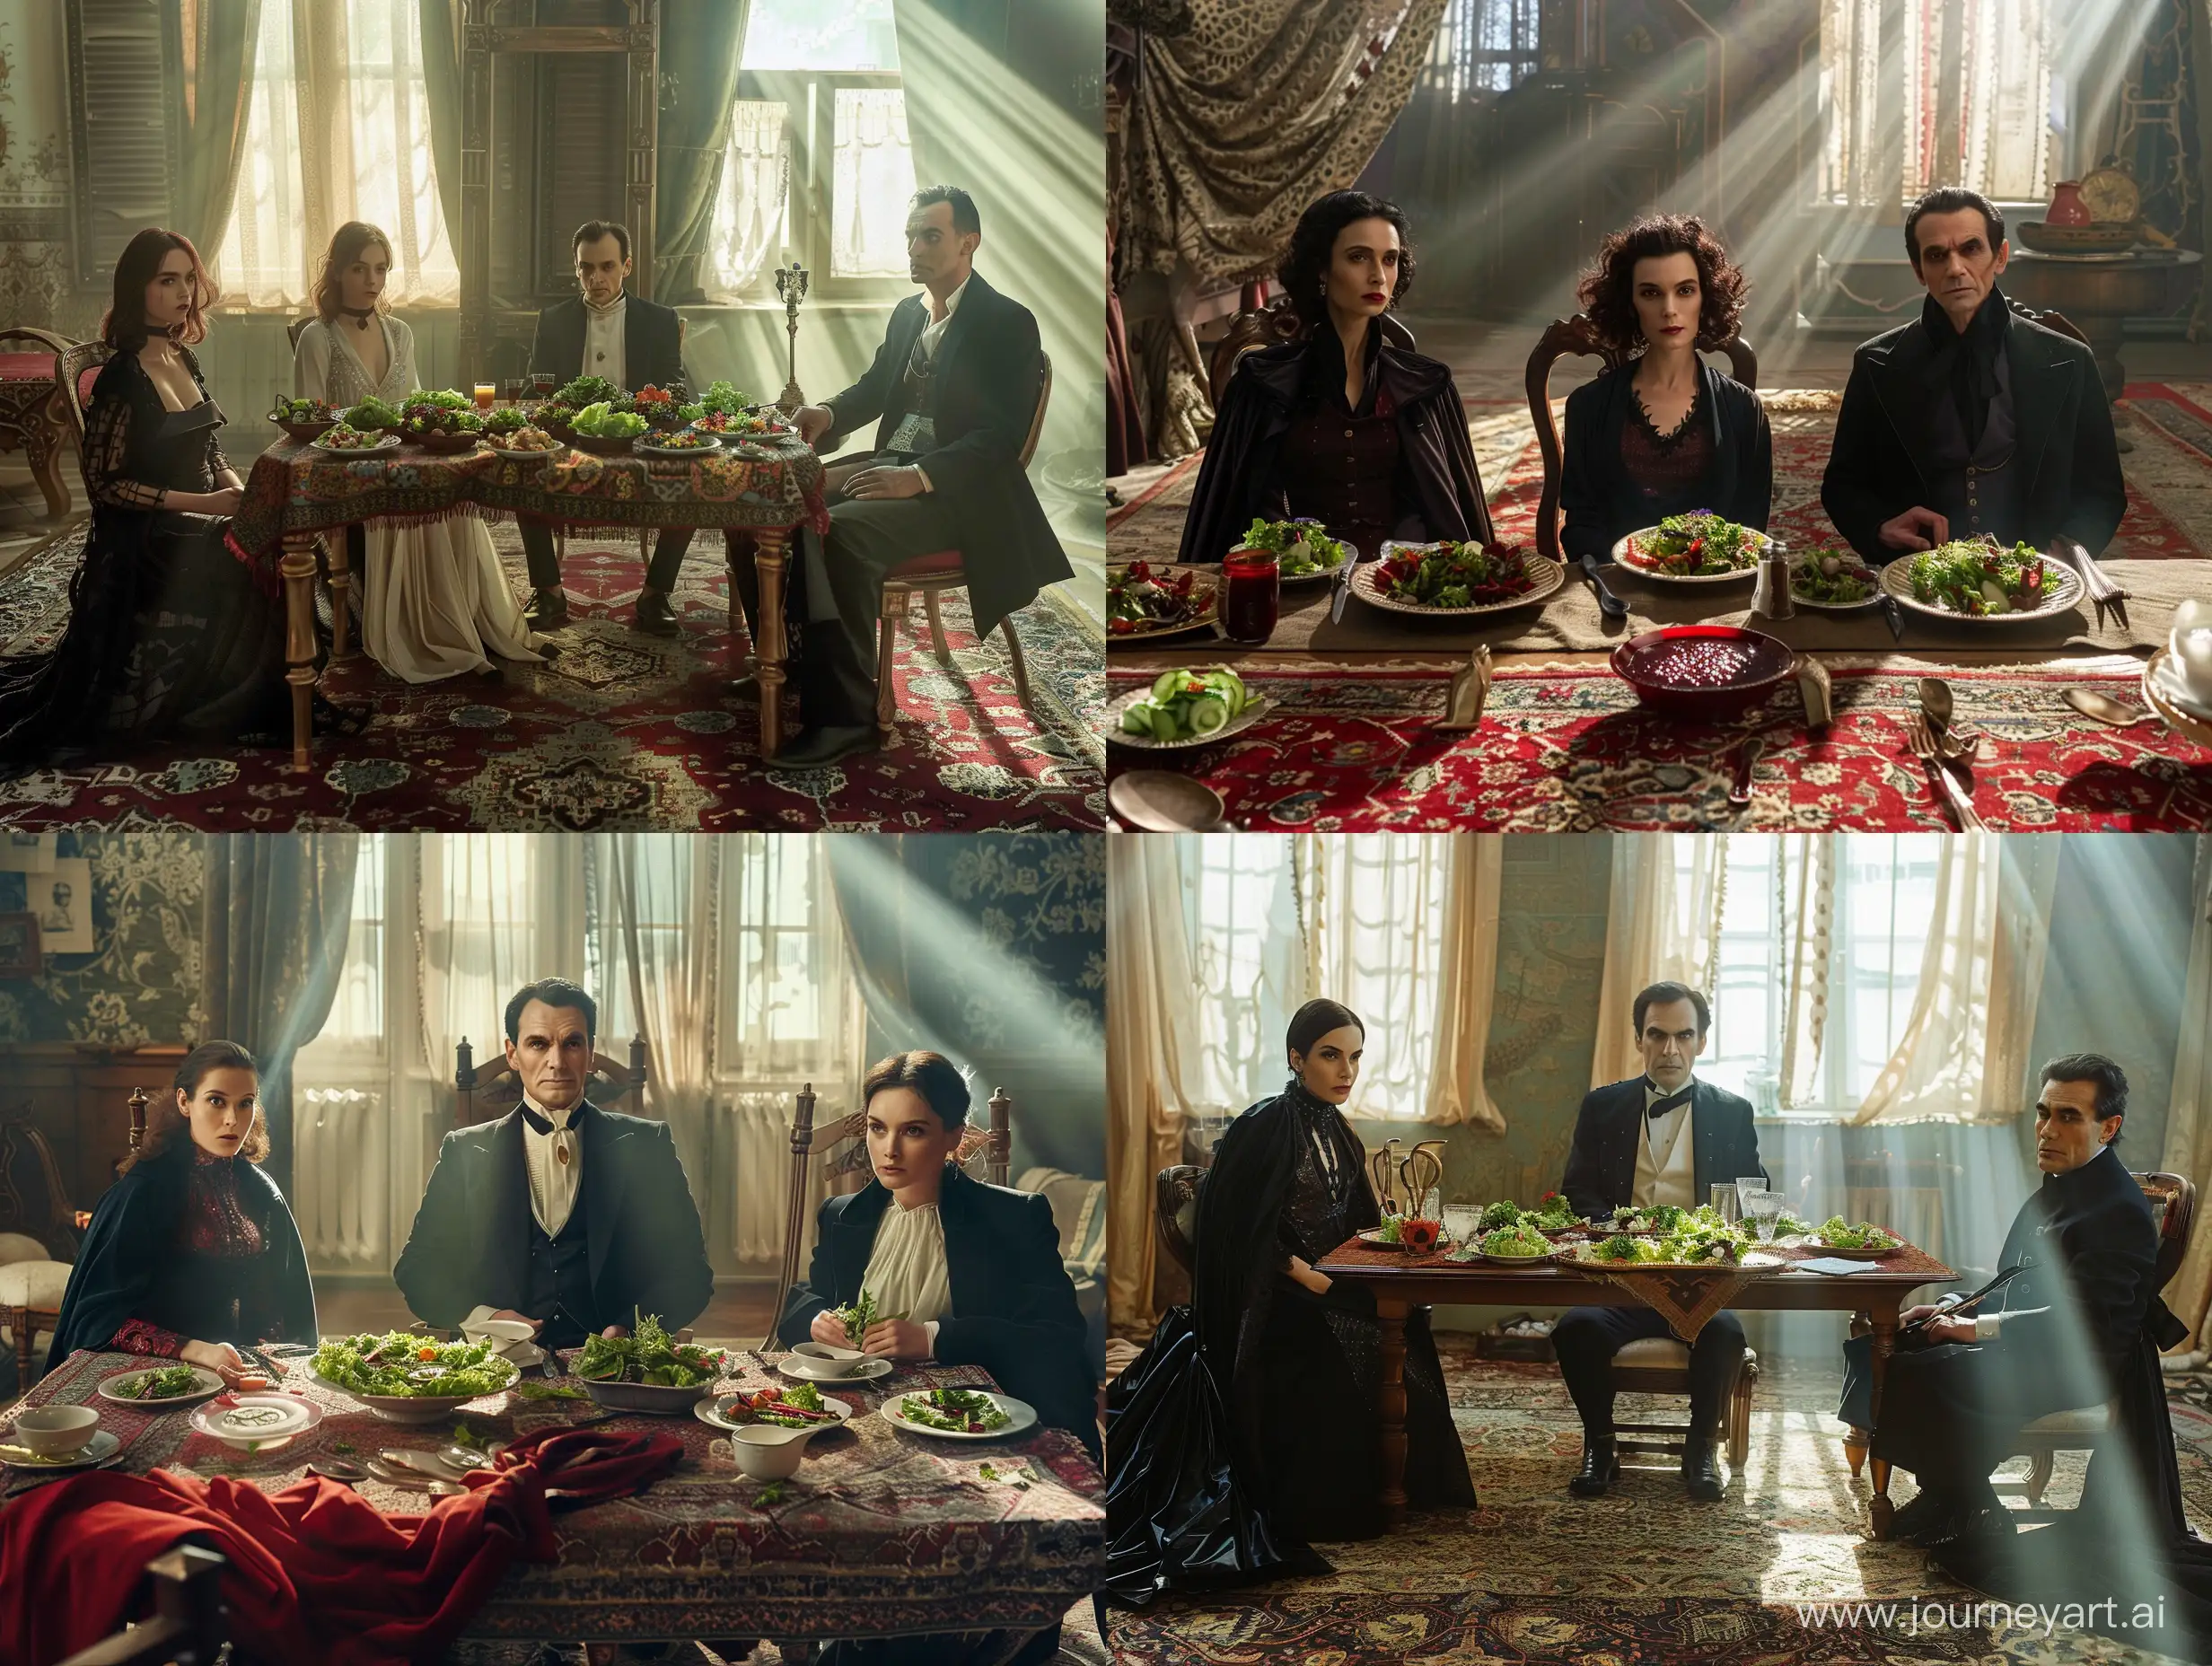 The characters of the film Van Helsing (Dracula, Gabriel, Anna) must sit at a table with salads on the background of a carpet and Soviet utensils. Sunlight falls from the window. They all communicate nicely. 🙂